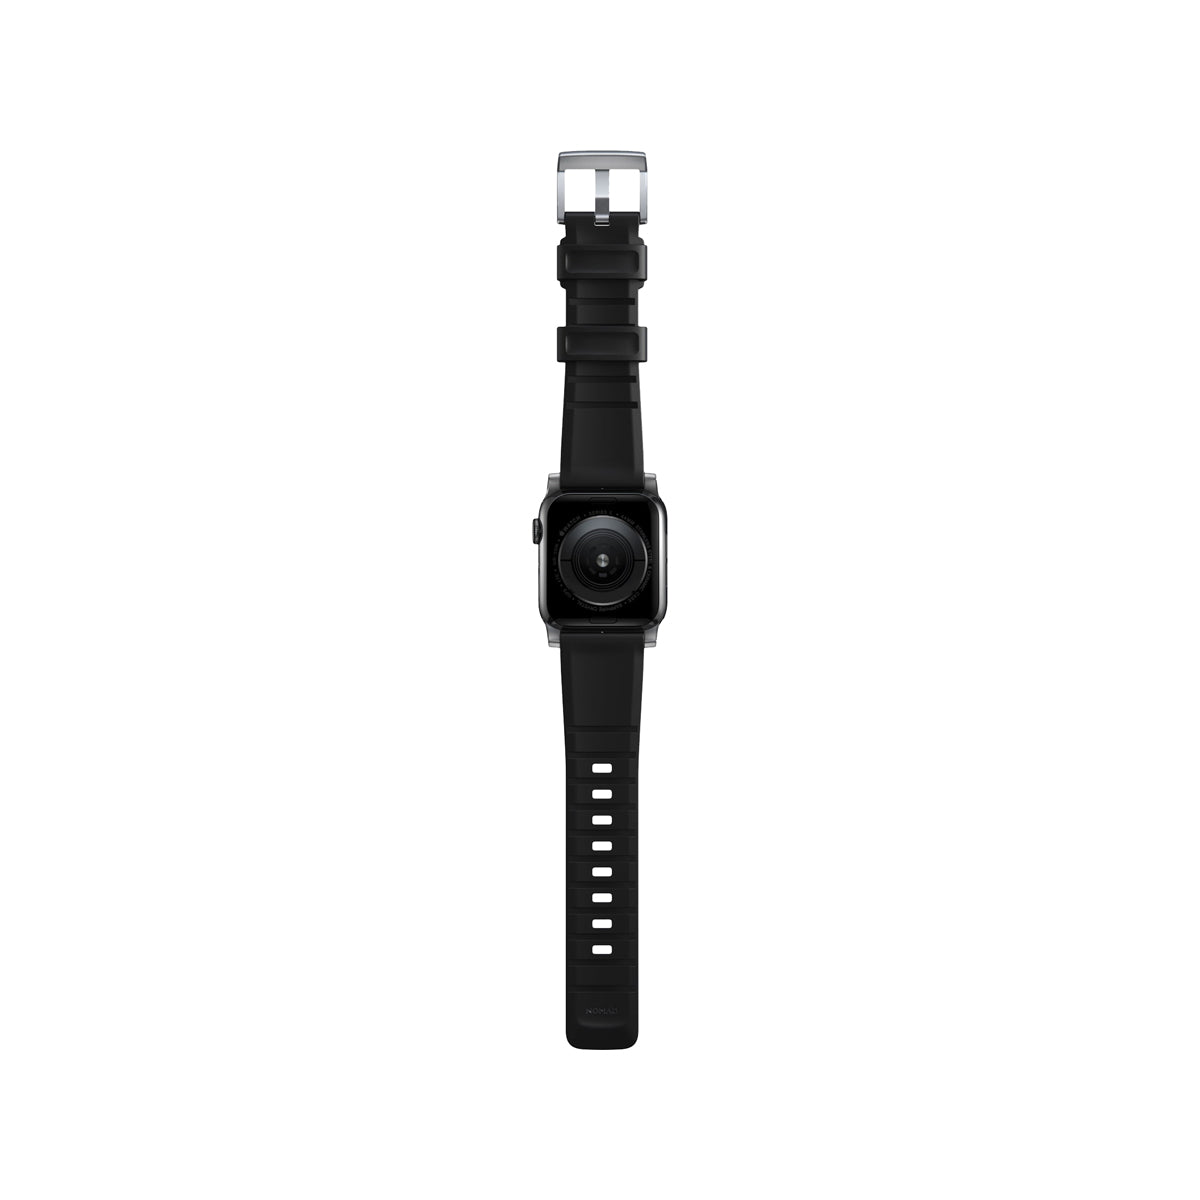 Nomad Apple Watch 41mm Rugged Band - Silver Hardware.